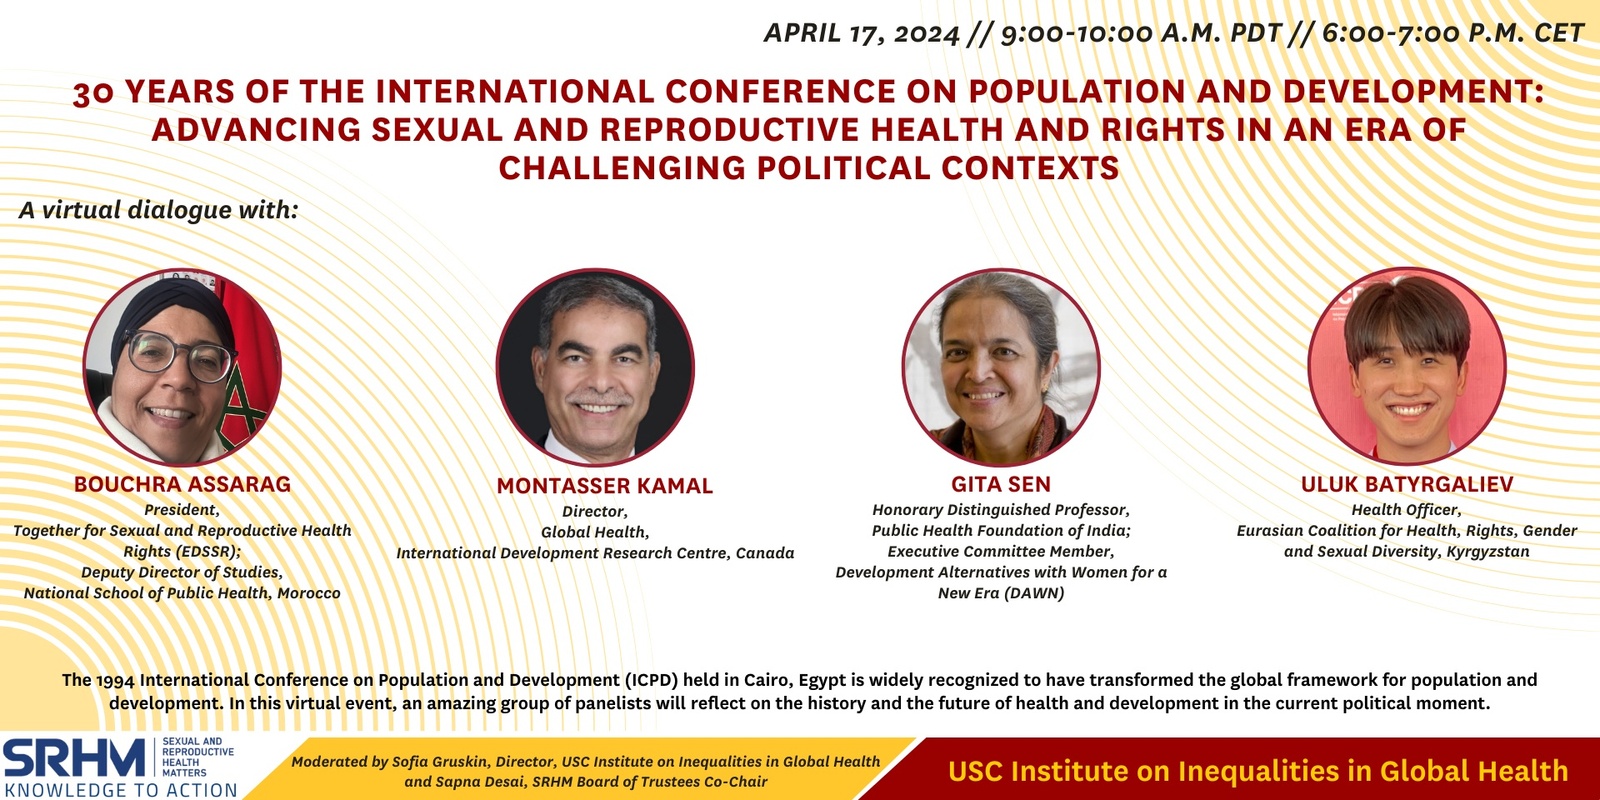 Banner image for 30 Years of the International Conference on Population and Development: Advancing Sexual and Reproductive Health and Rights in an Era of Challenging Political Contexts